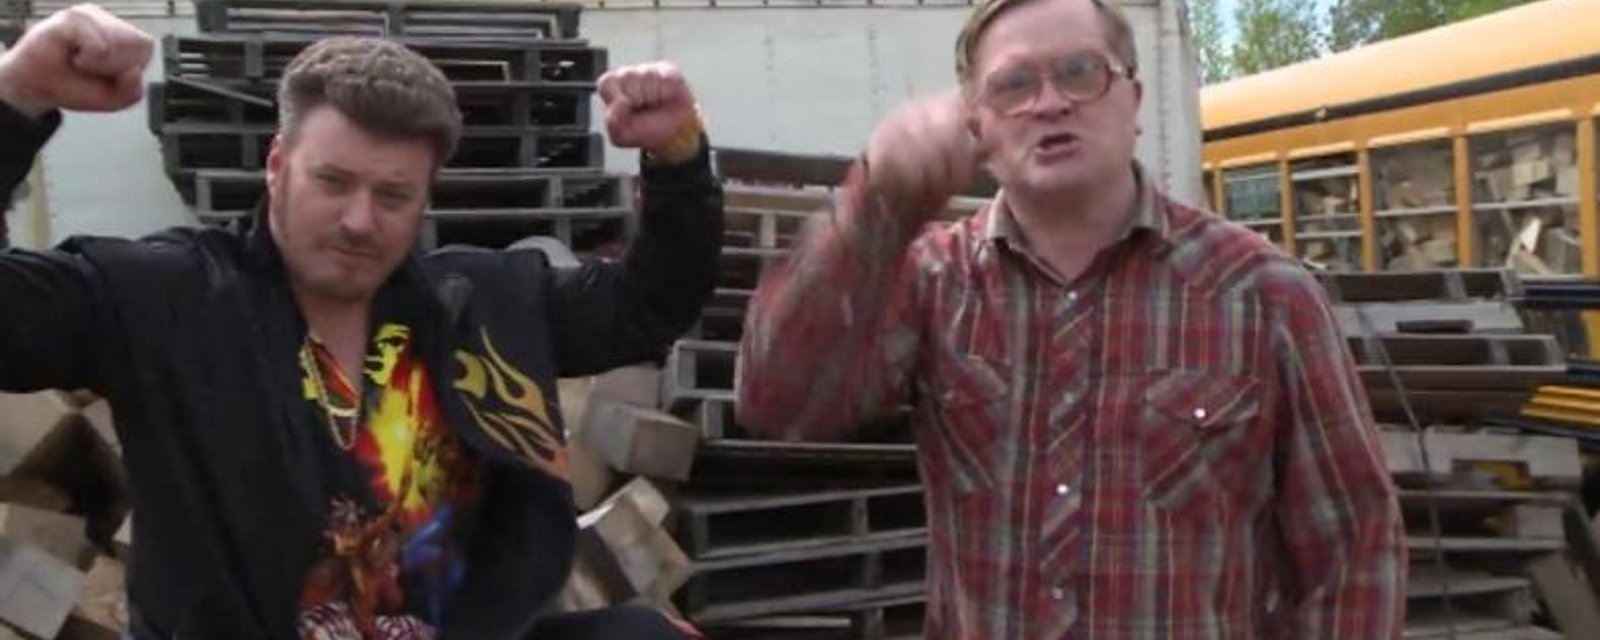 Trailer Park Boys have a message for Crosby and the Penguins.